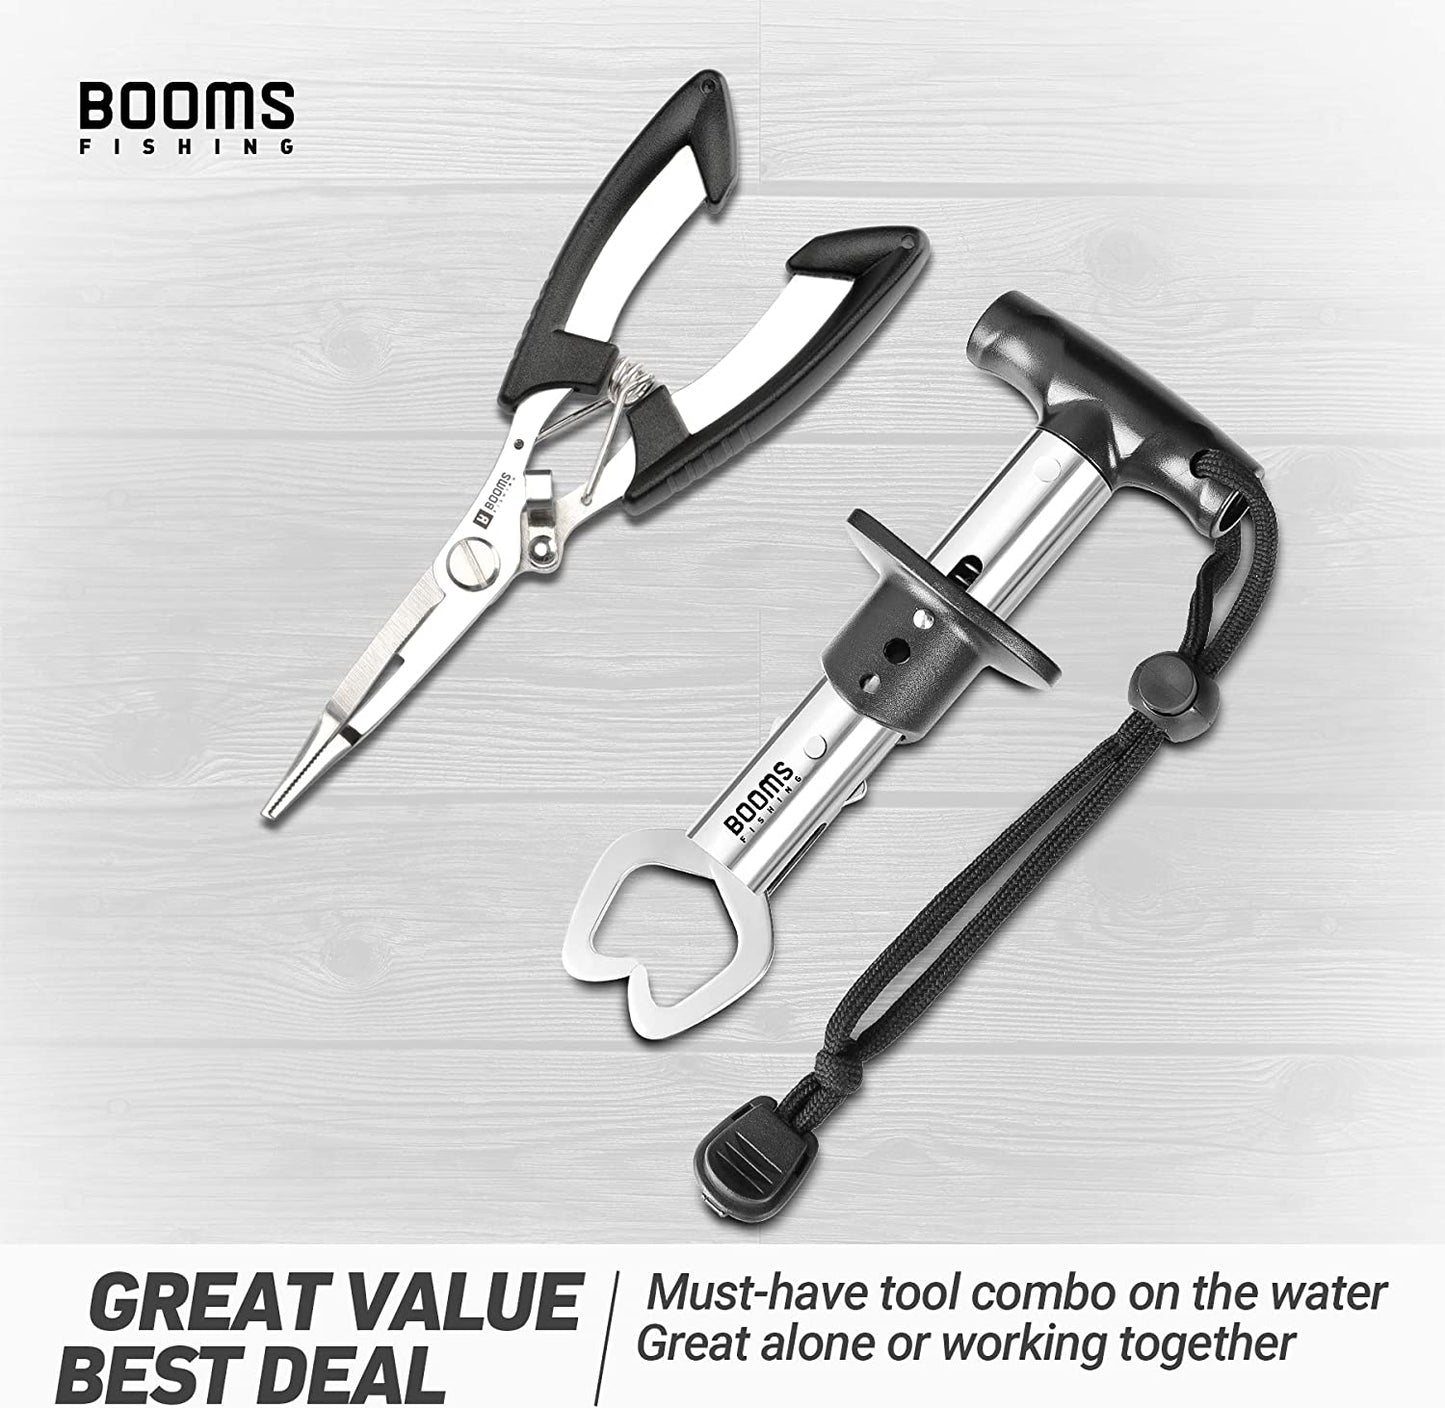 Booms Fishing H01 Small Fishing Pliers Scissors Braid Cutters Lightweight Stainless Steel Fishing Tools Split Ring Pliers Hook Remover - (For 8 piece(s))